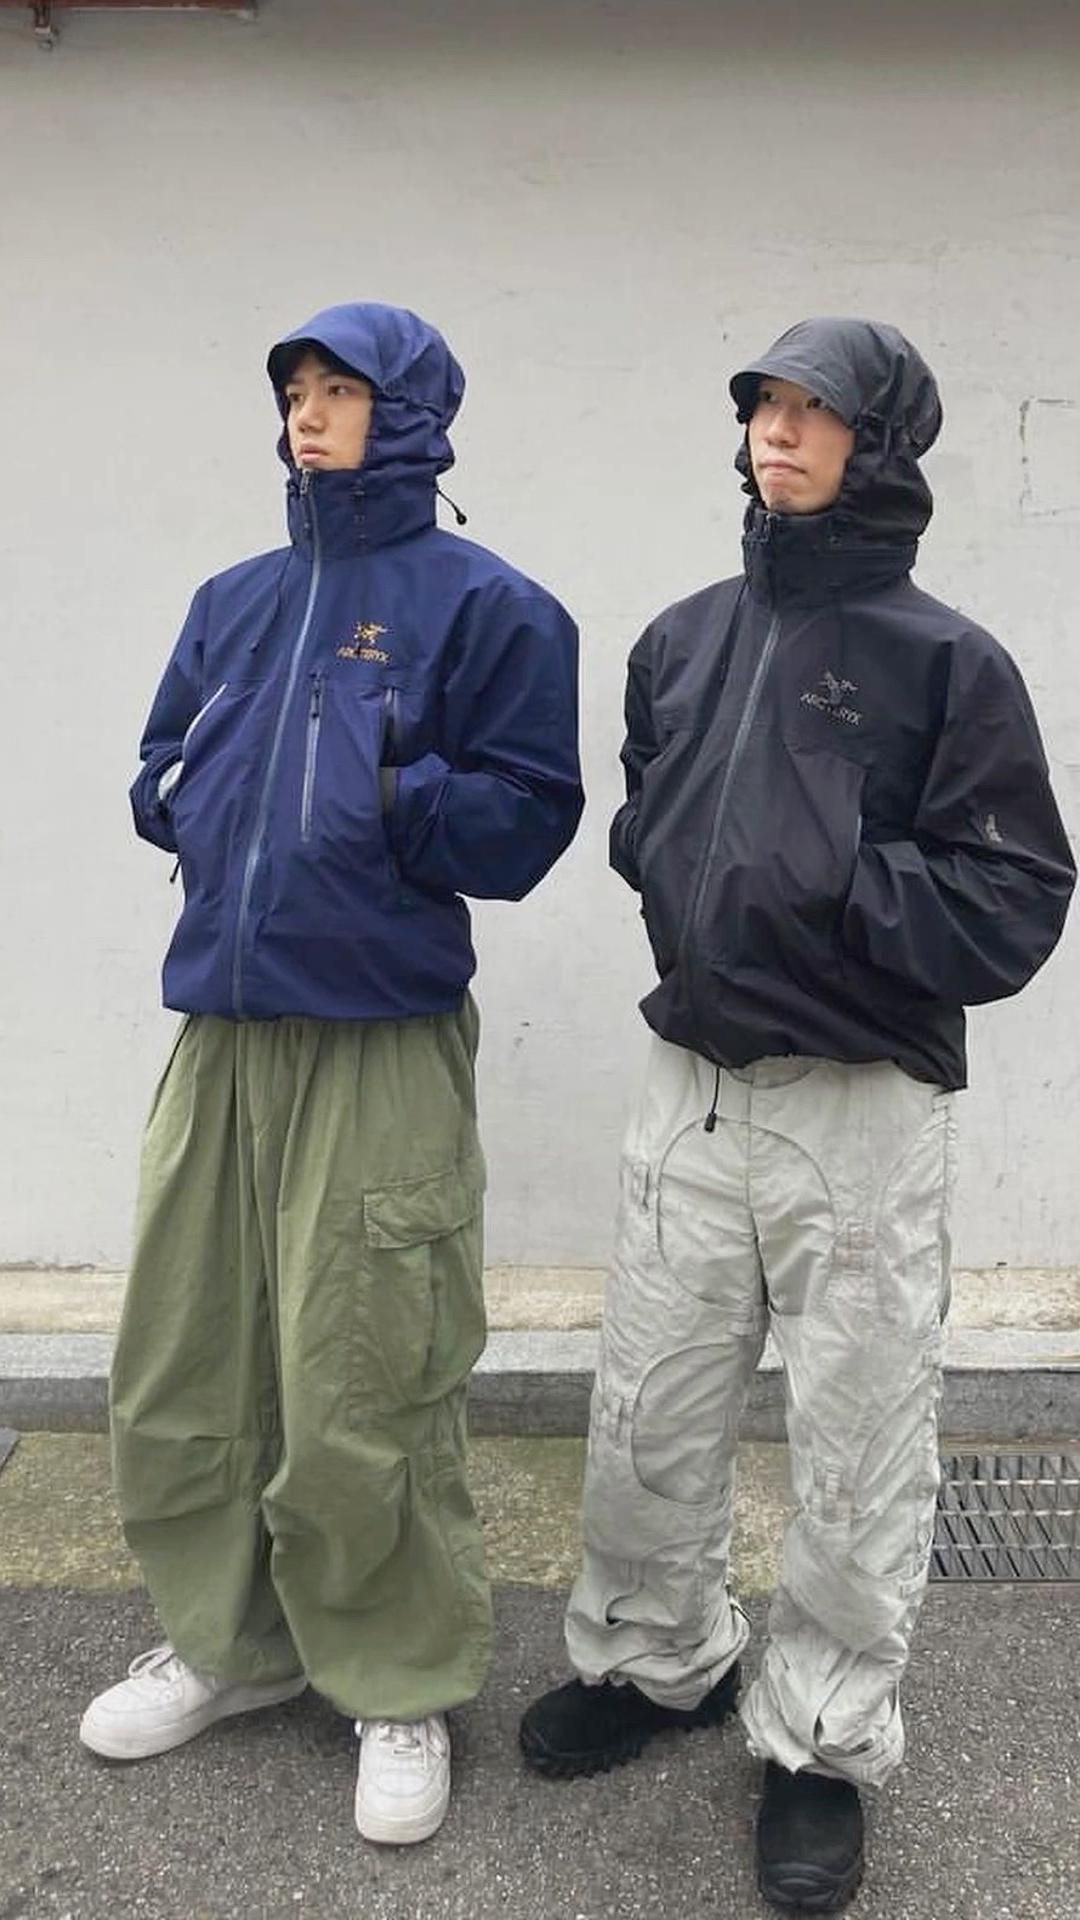 outdoor outfit inspo, Arcteryx, gorpcore, shell jackets. Rainy day outfit men, Streetwear men outfits, Fashion